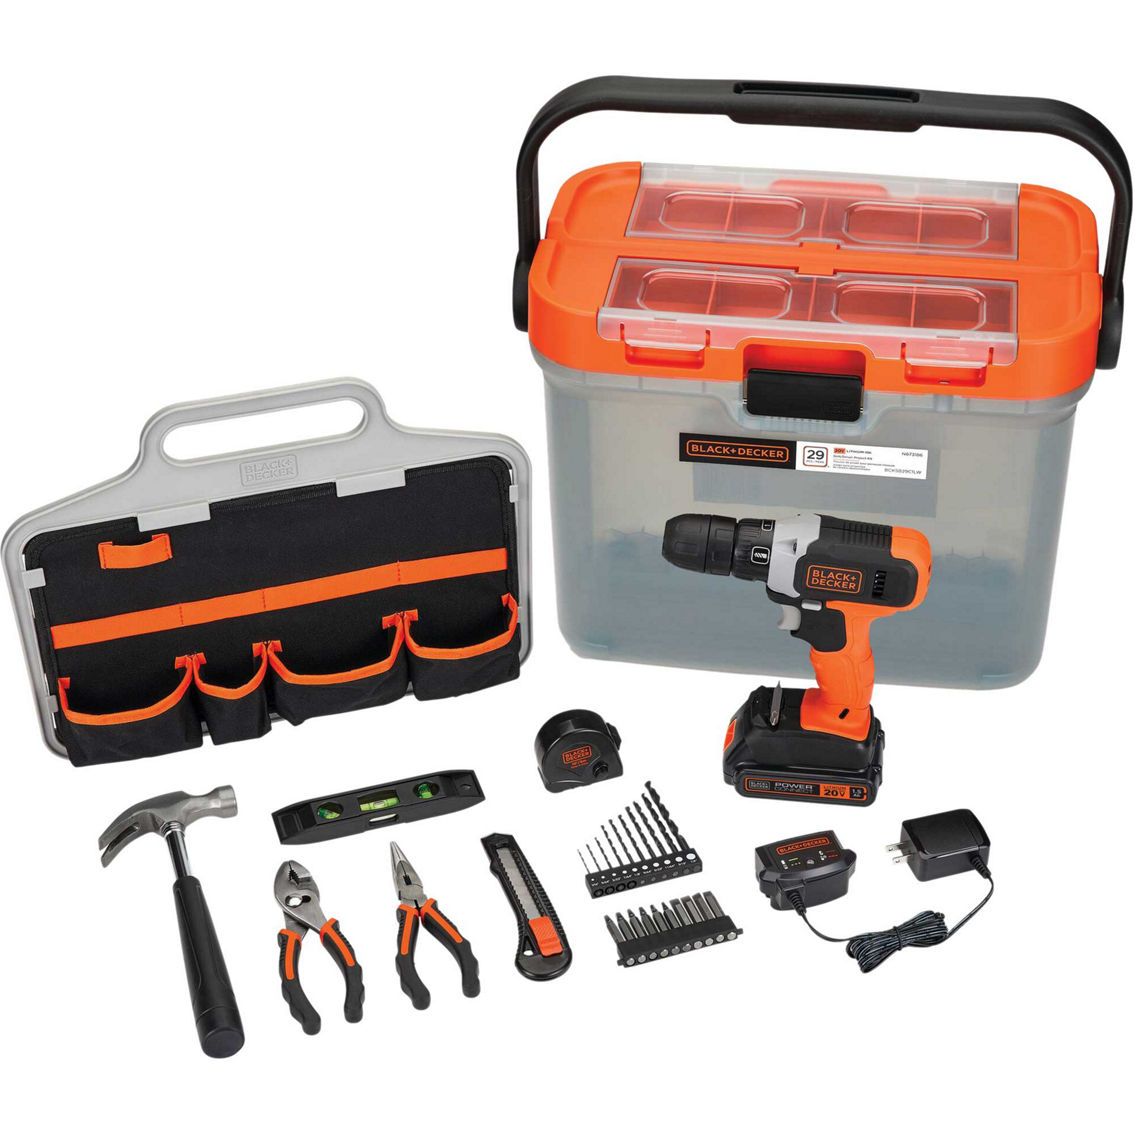 Black + Decker 20V MAX Cordless Drill with 28 pc. Home Project Kit - Image 3 of 5